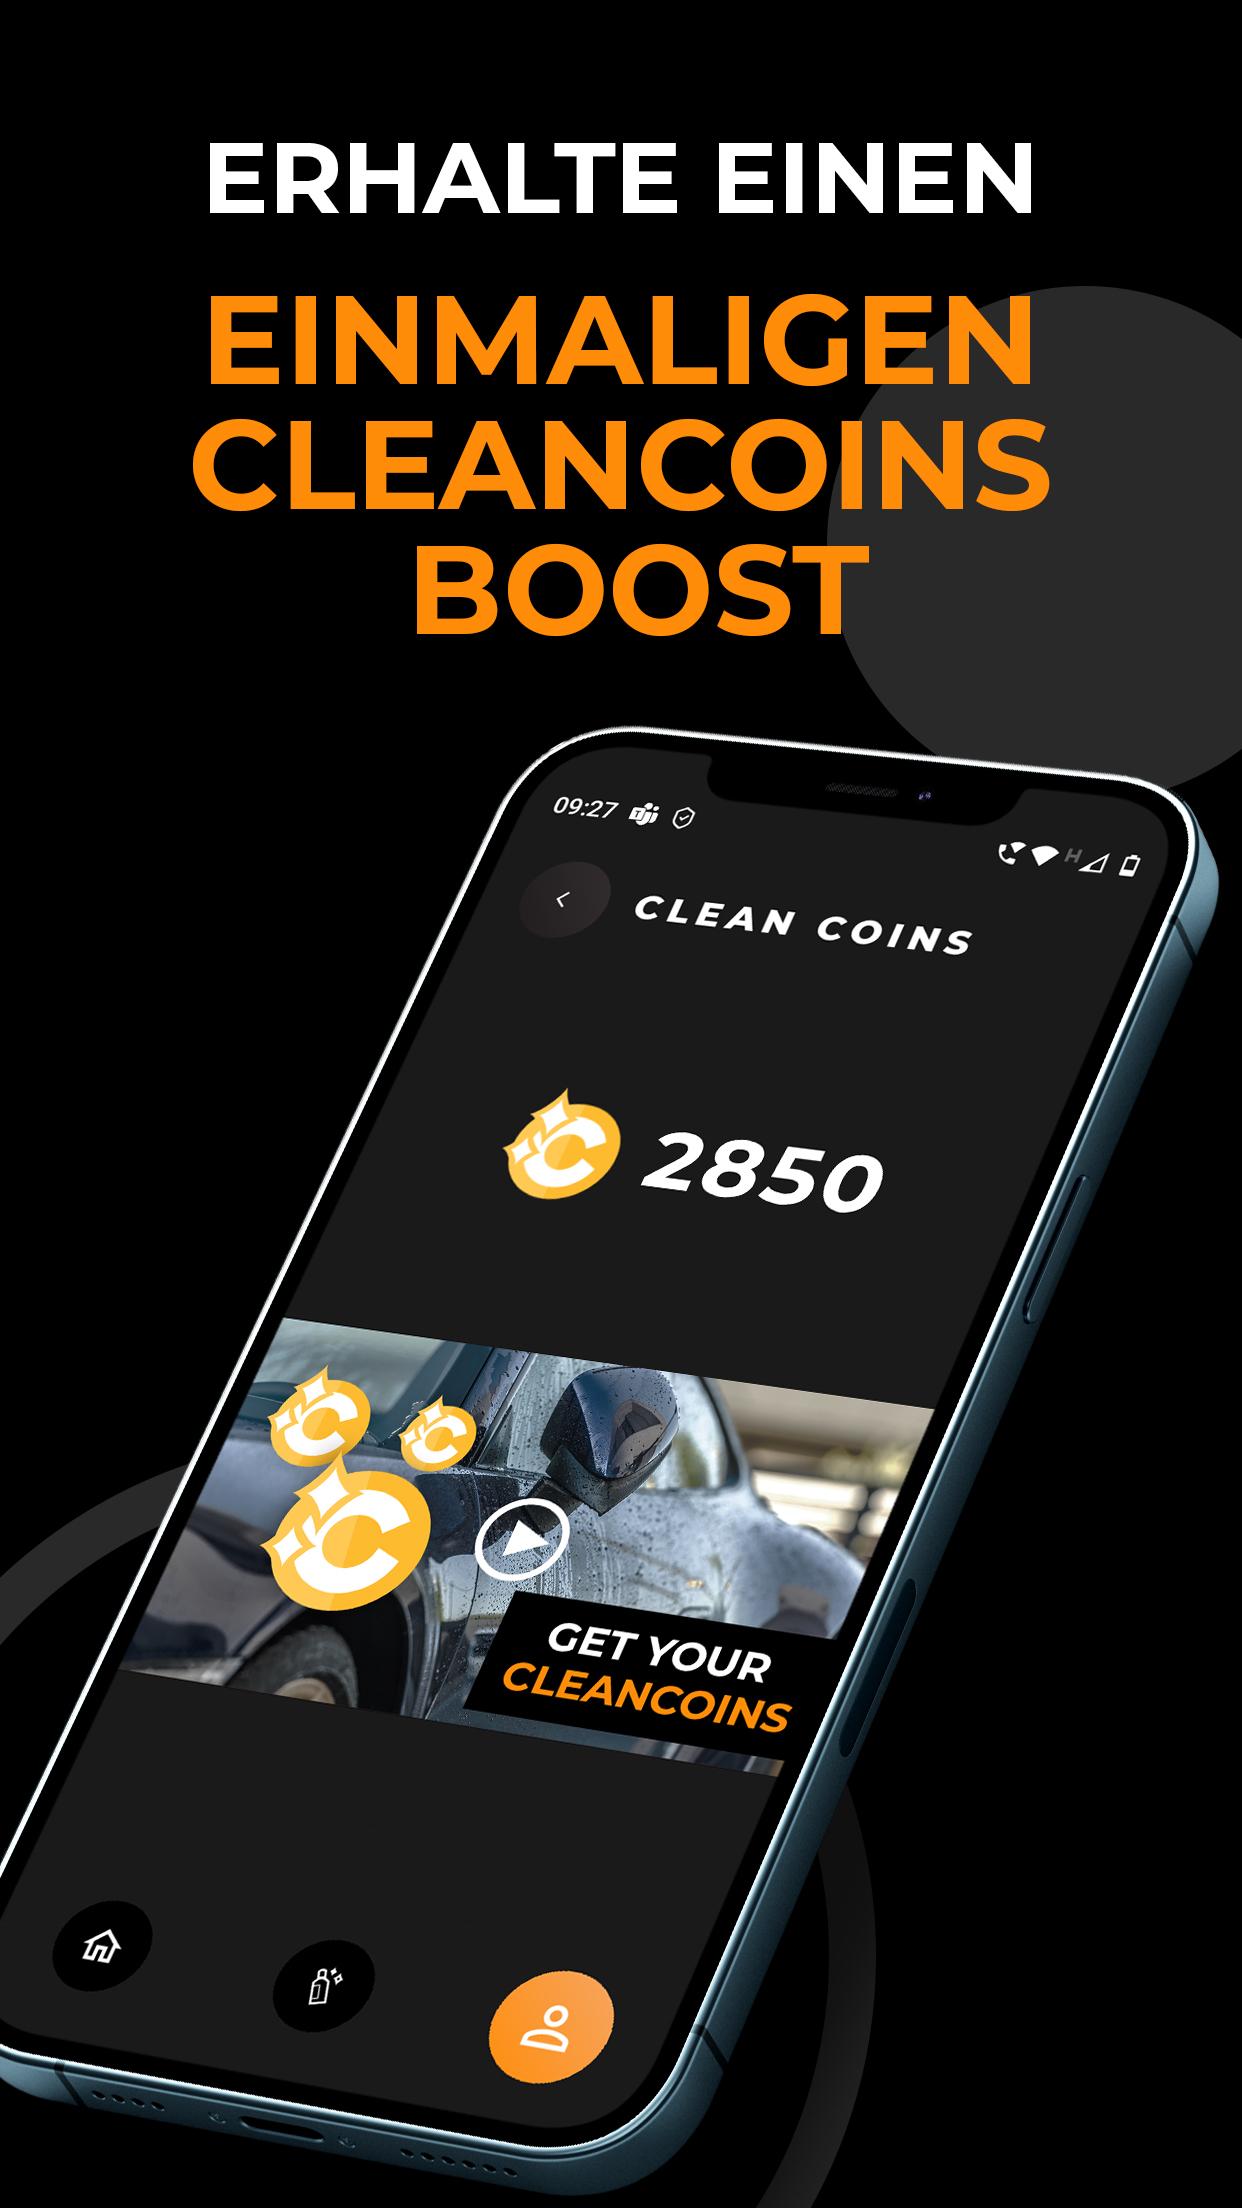 CarCare App by Area52 1.0.9 Screenshot 8